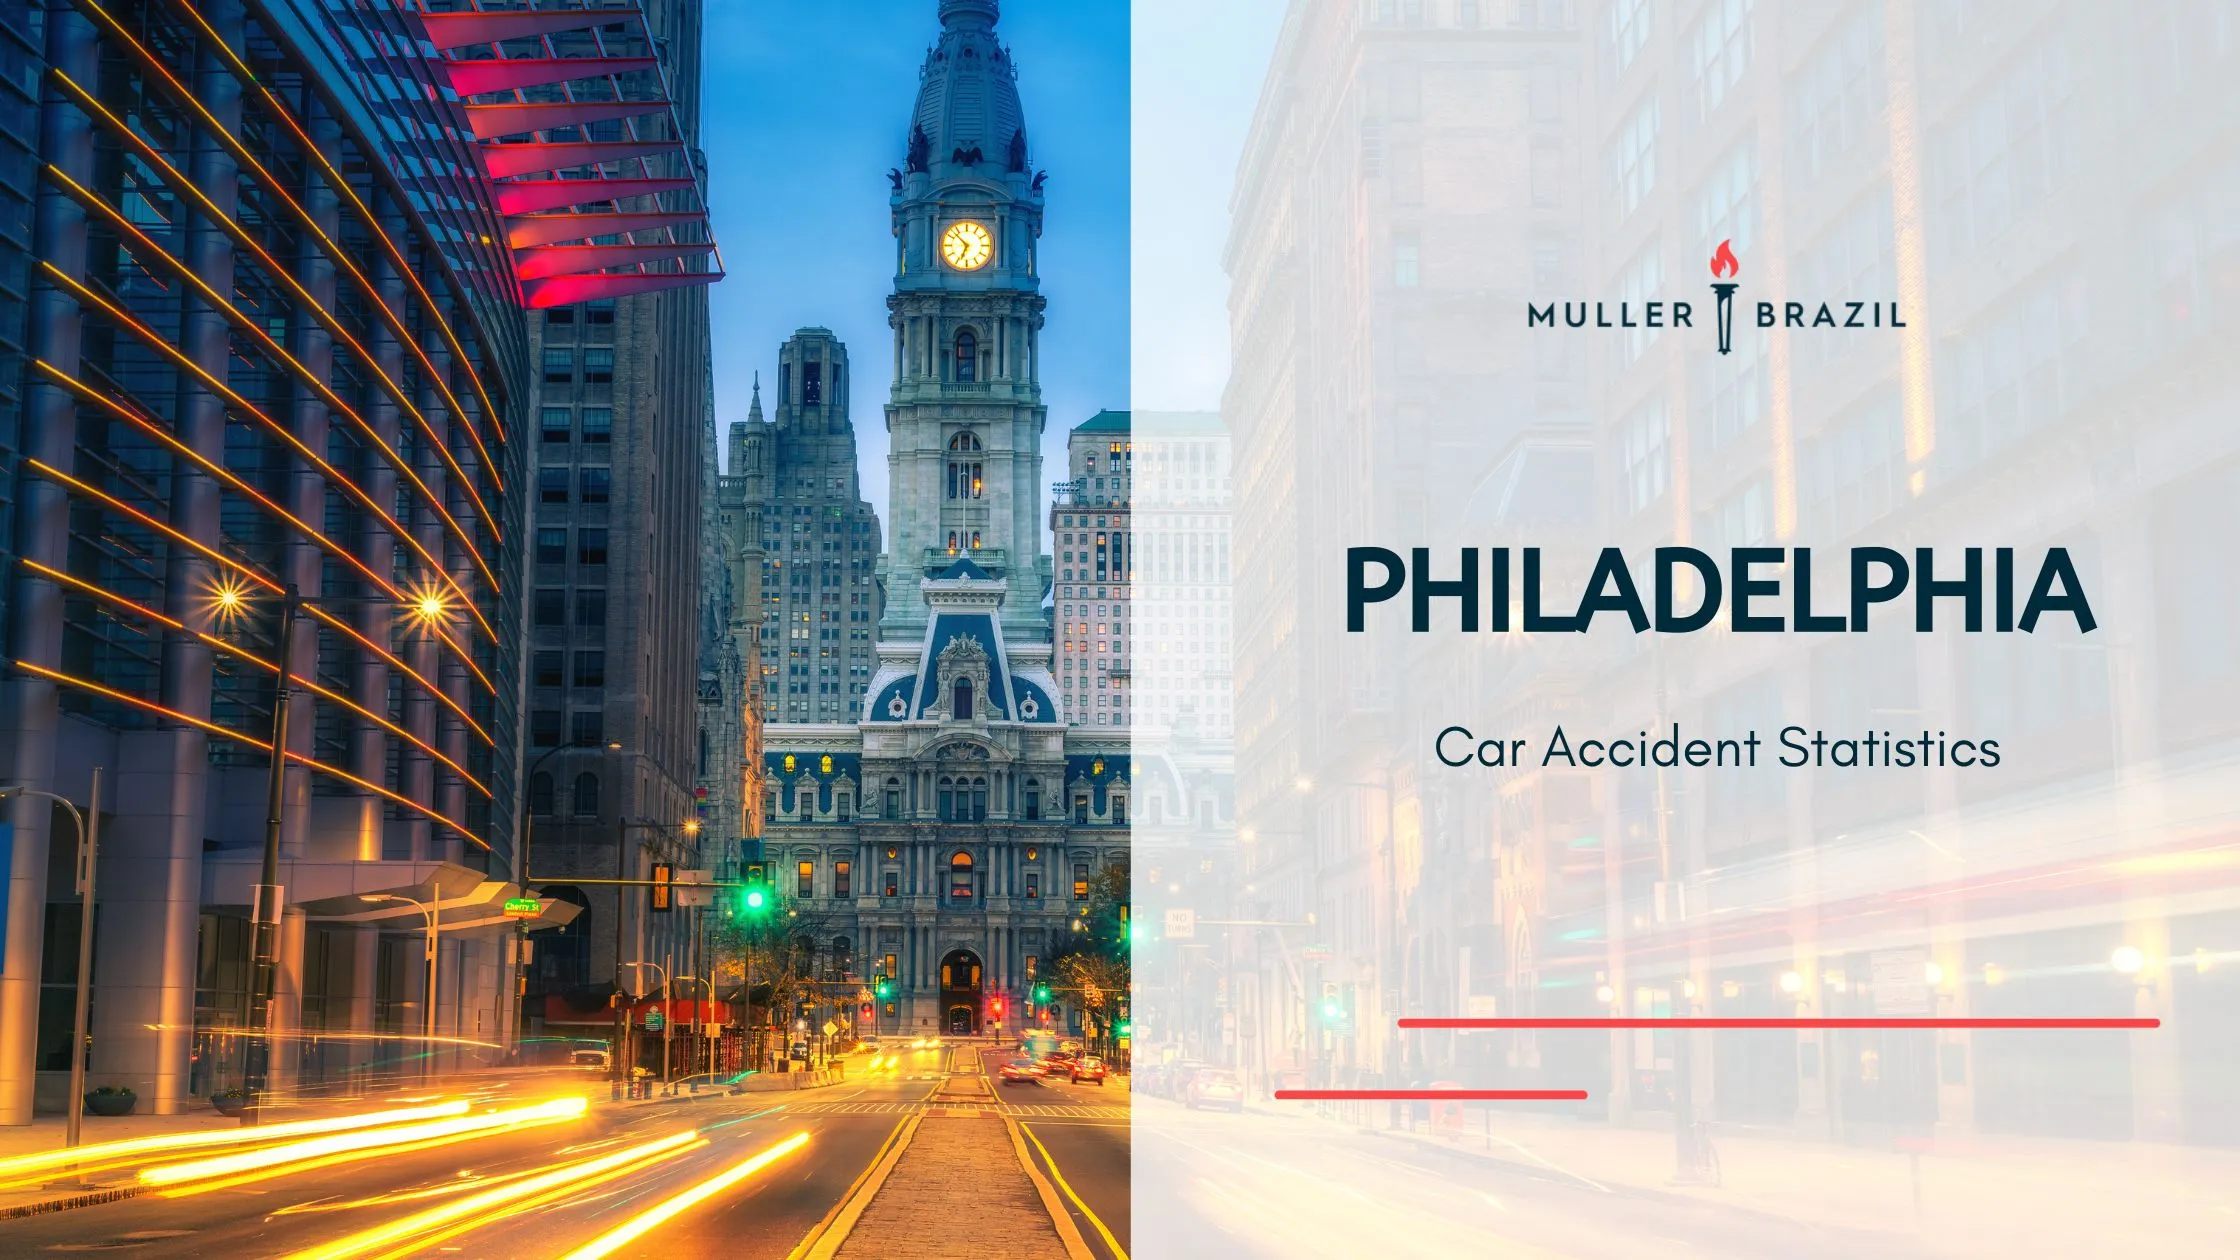 Featured image photo for blog Philadelphia Car Accident Statistics, picture of Philadelphia's City Hall at dusk